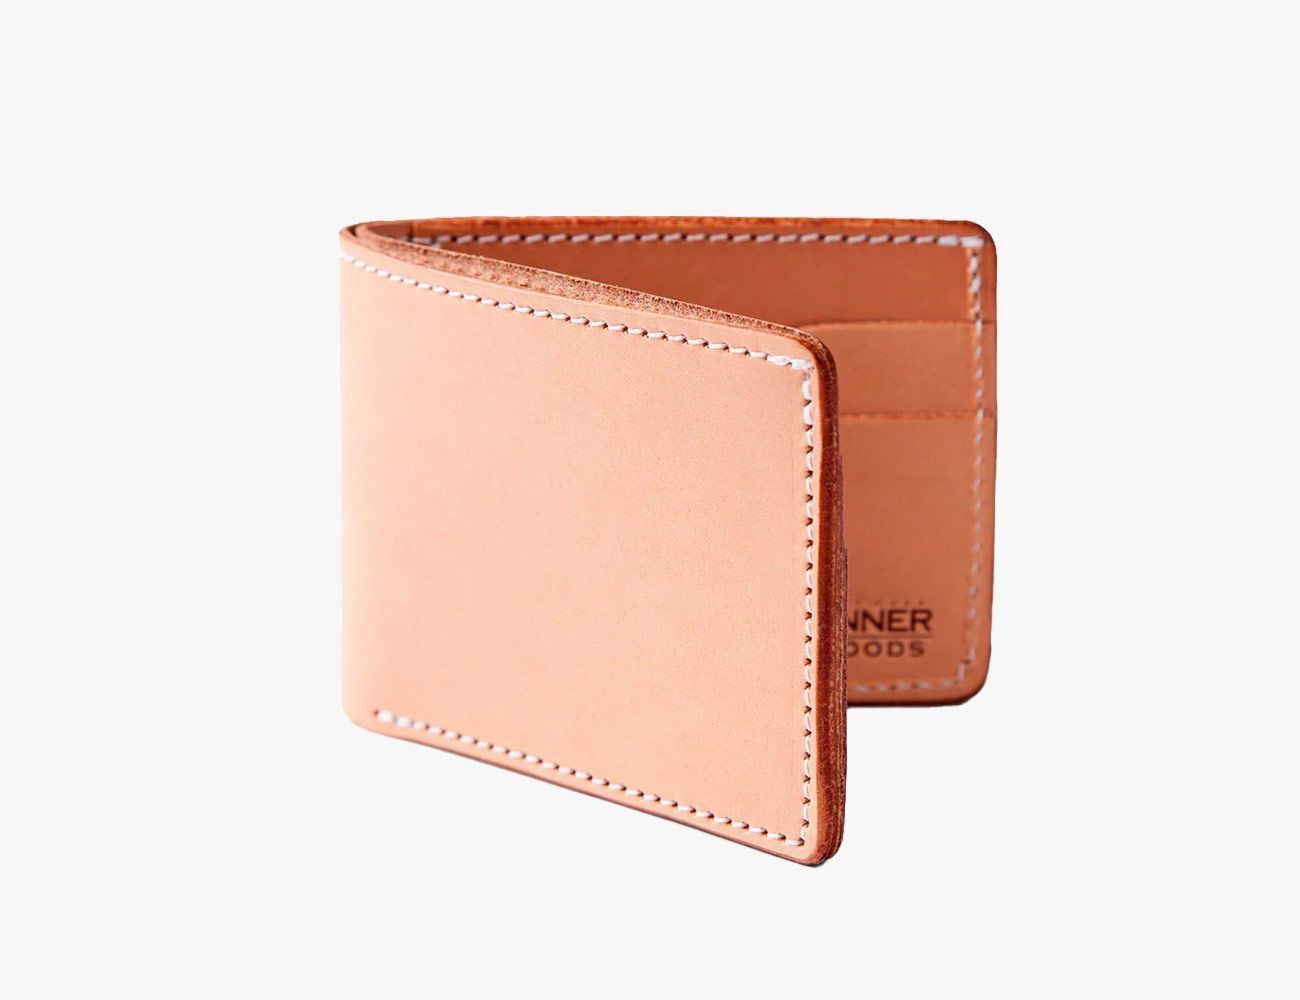 My favorite wallets in terms of price, look, functionality, & durabili, Wallets